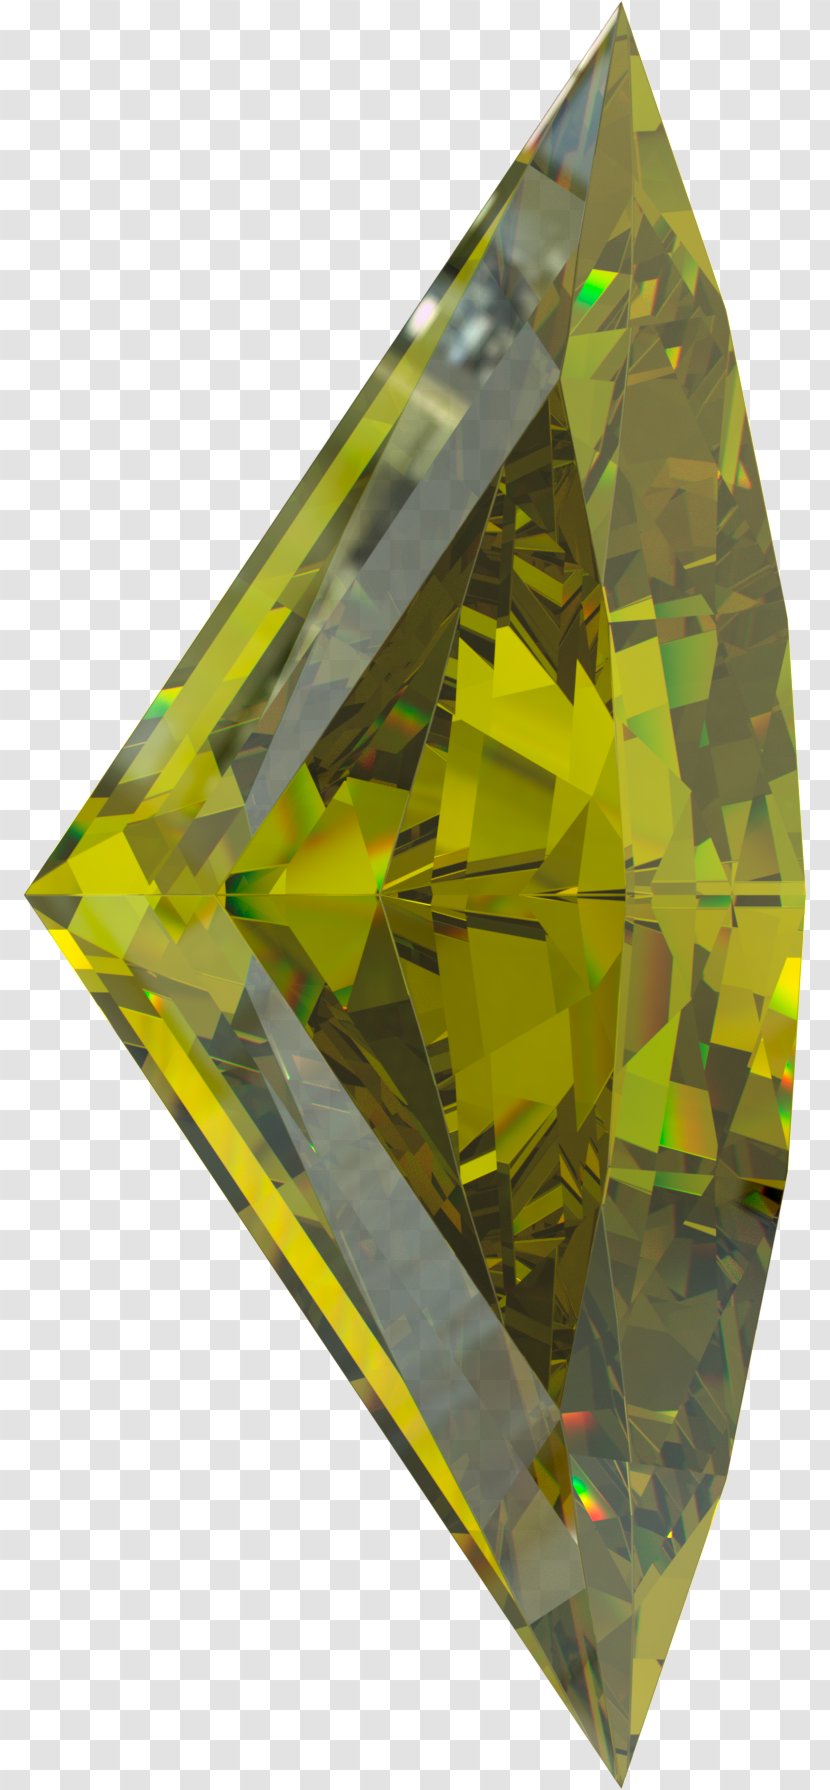 Crystal Gemstone Triangle - Modified Transparent PNG